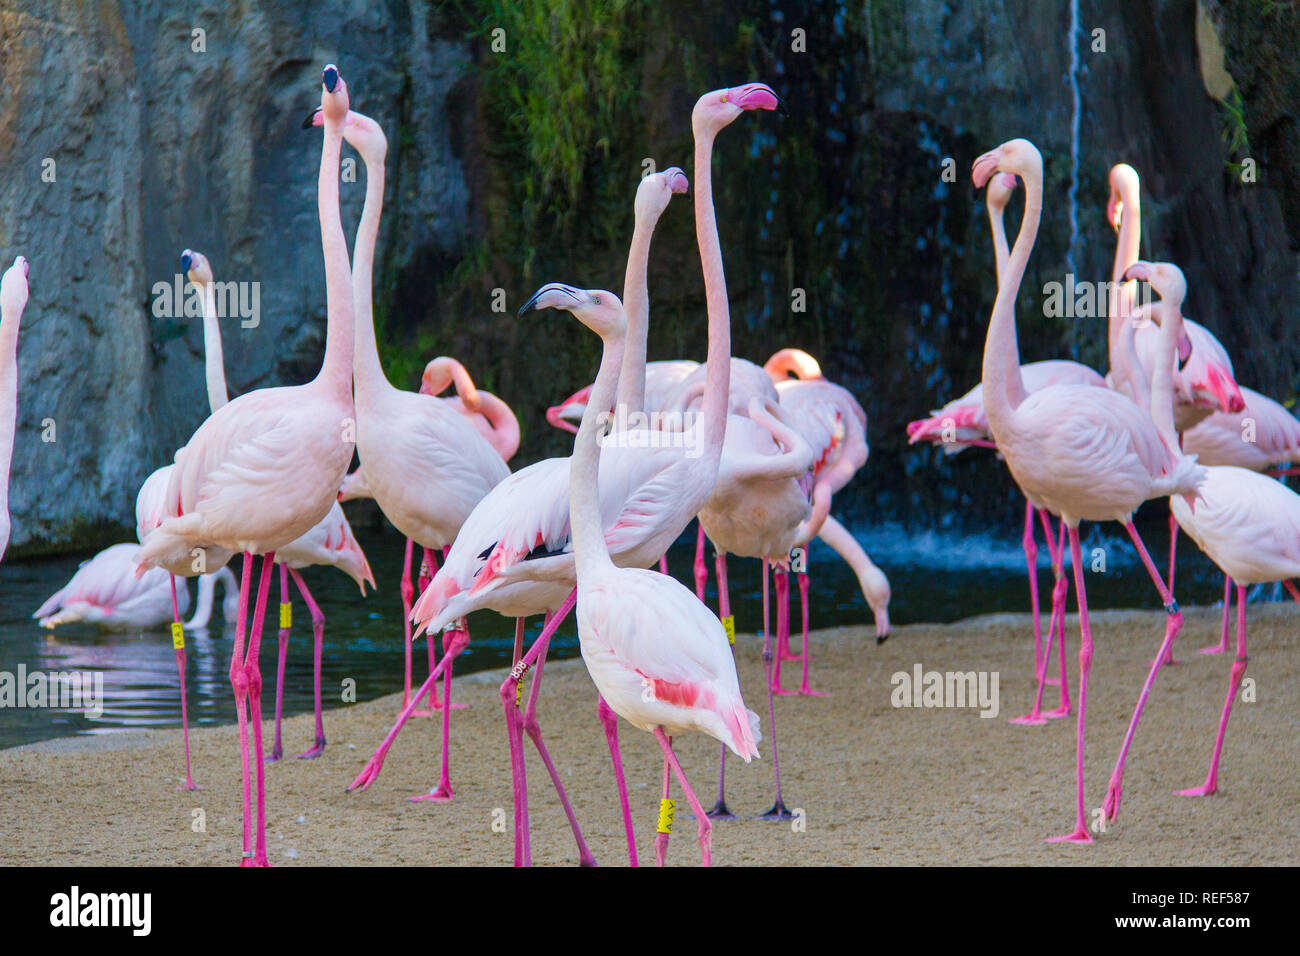 A flock of pink flamingos (Phoenicopterus) in a zoo, at Bioparc, Valencia, Spain Stock Photo